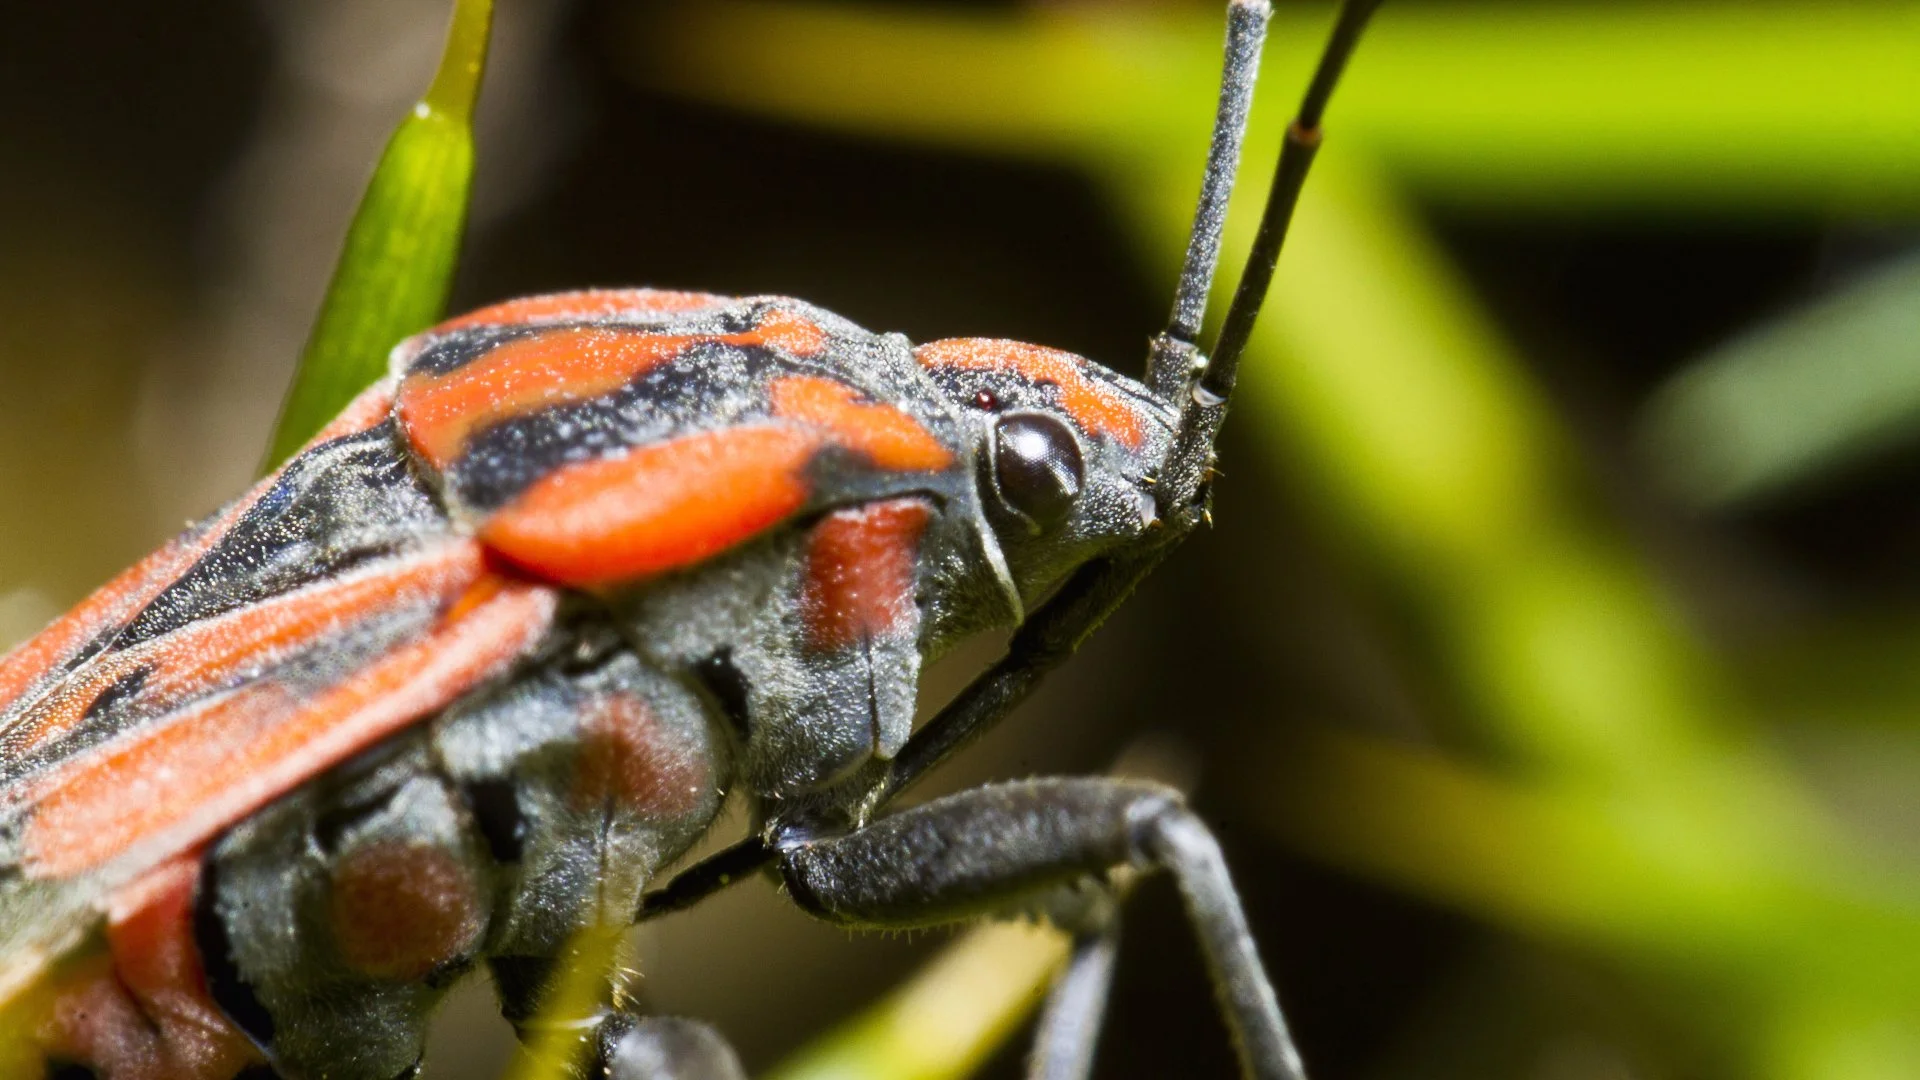 Chinch Bugs Aren't Harmless - Don't Let Them Damage Your Lawn!